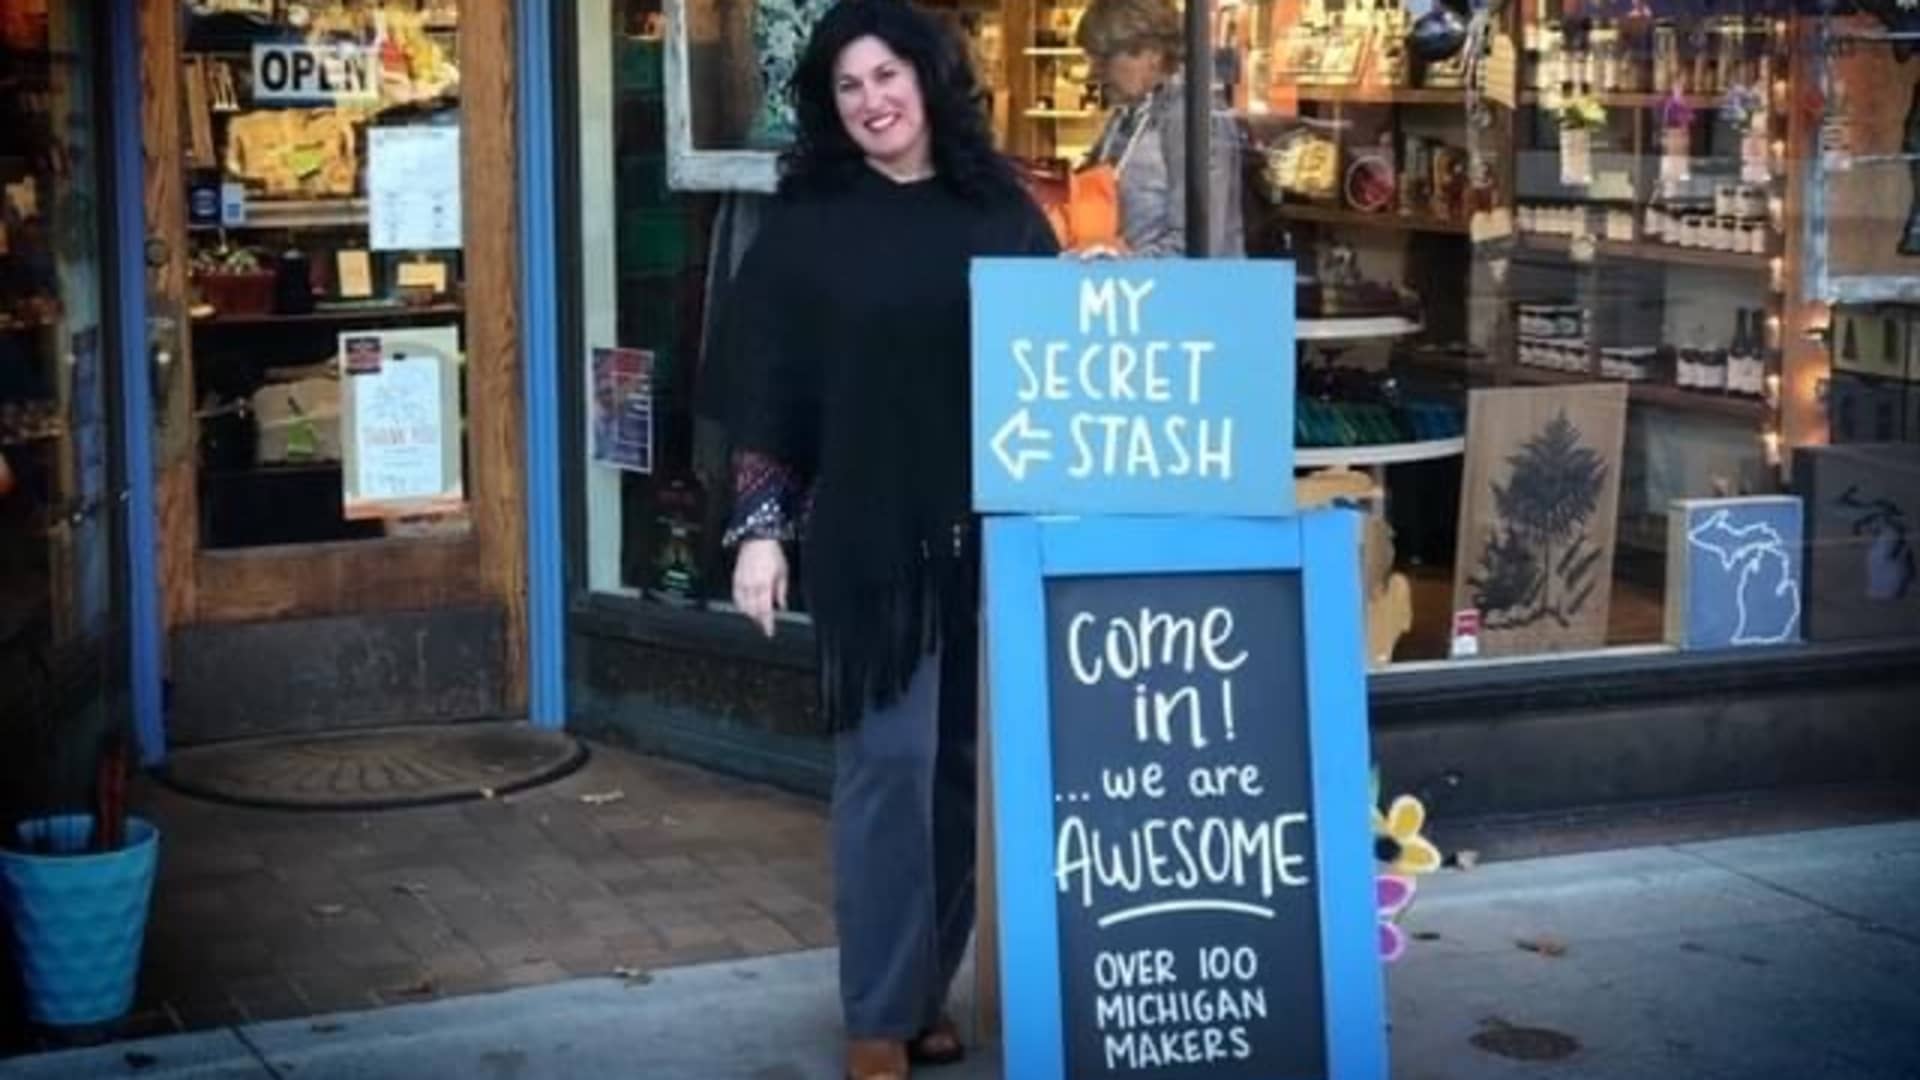 My Secret Stash in Traverse City, Mich., is thinly-staffed ahead of the holiday rush. Owner Karen Hilt is gearing up for a strong shopping season.